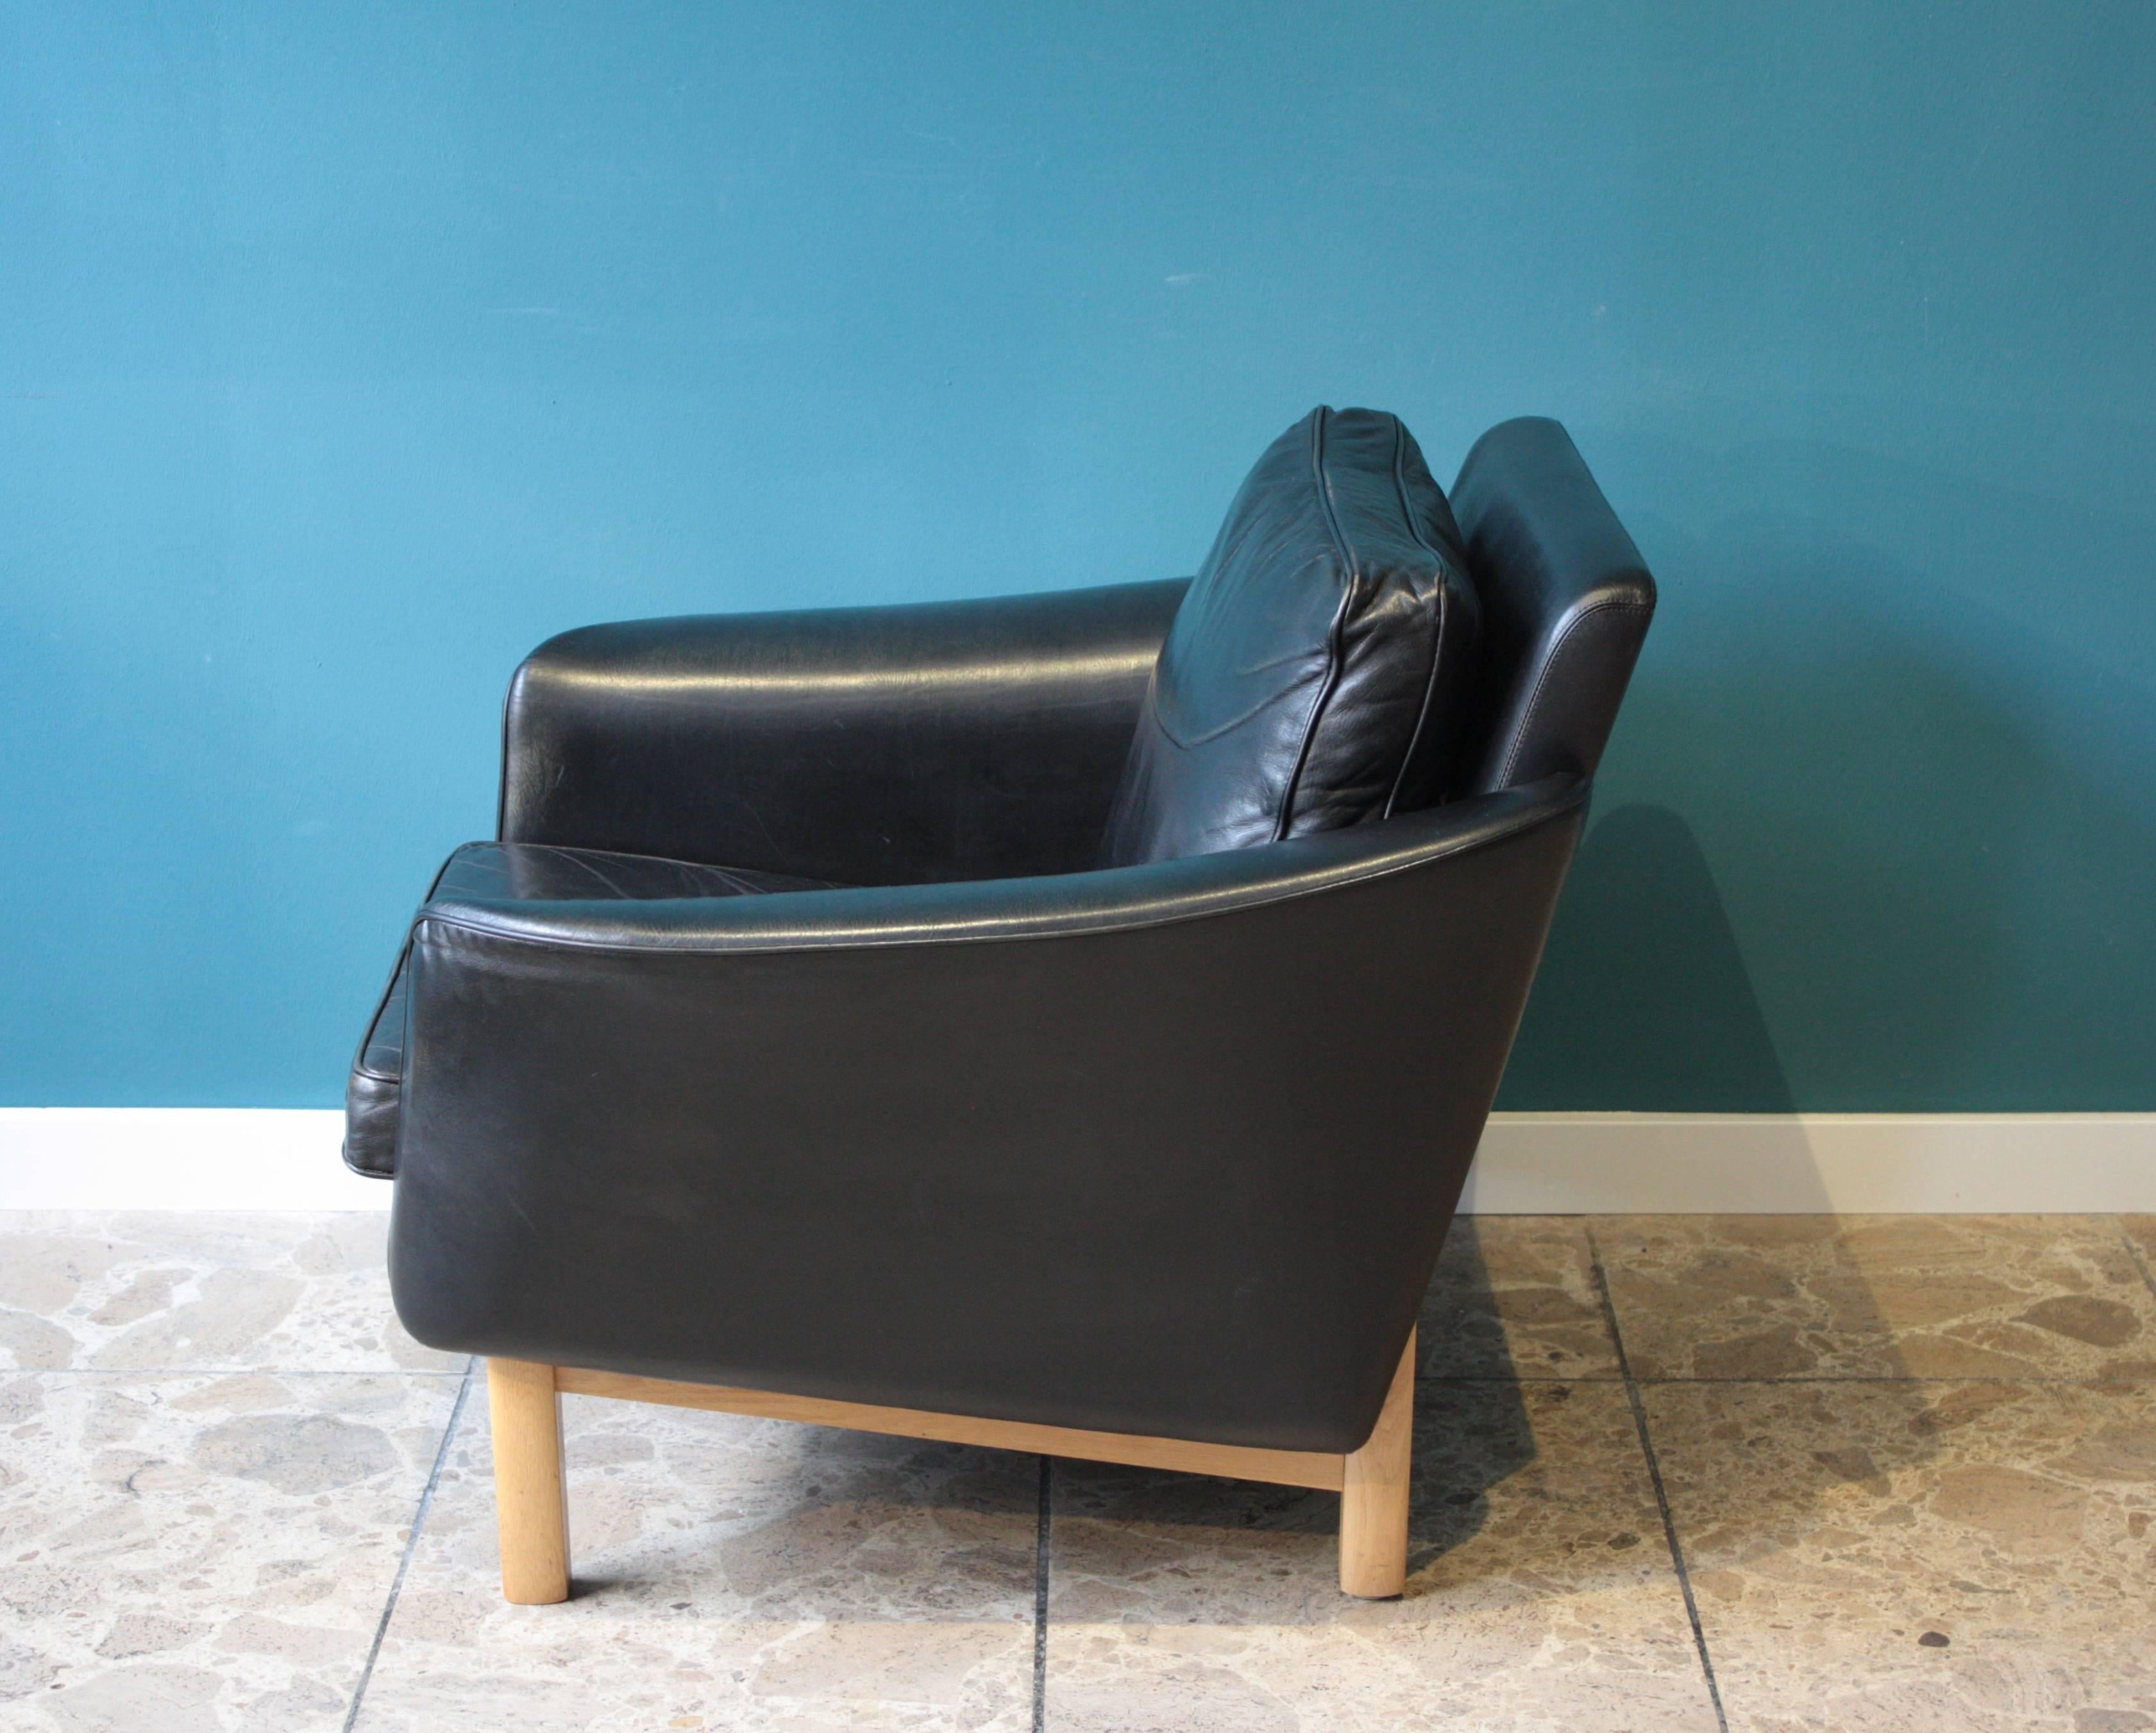 This leather lounge chair with oak legs was designed by Lennart Bender and produced by Ulferts Möbel in Sweden in the 1960s. It is part of the 